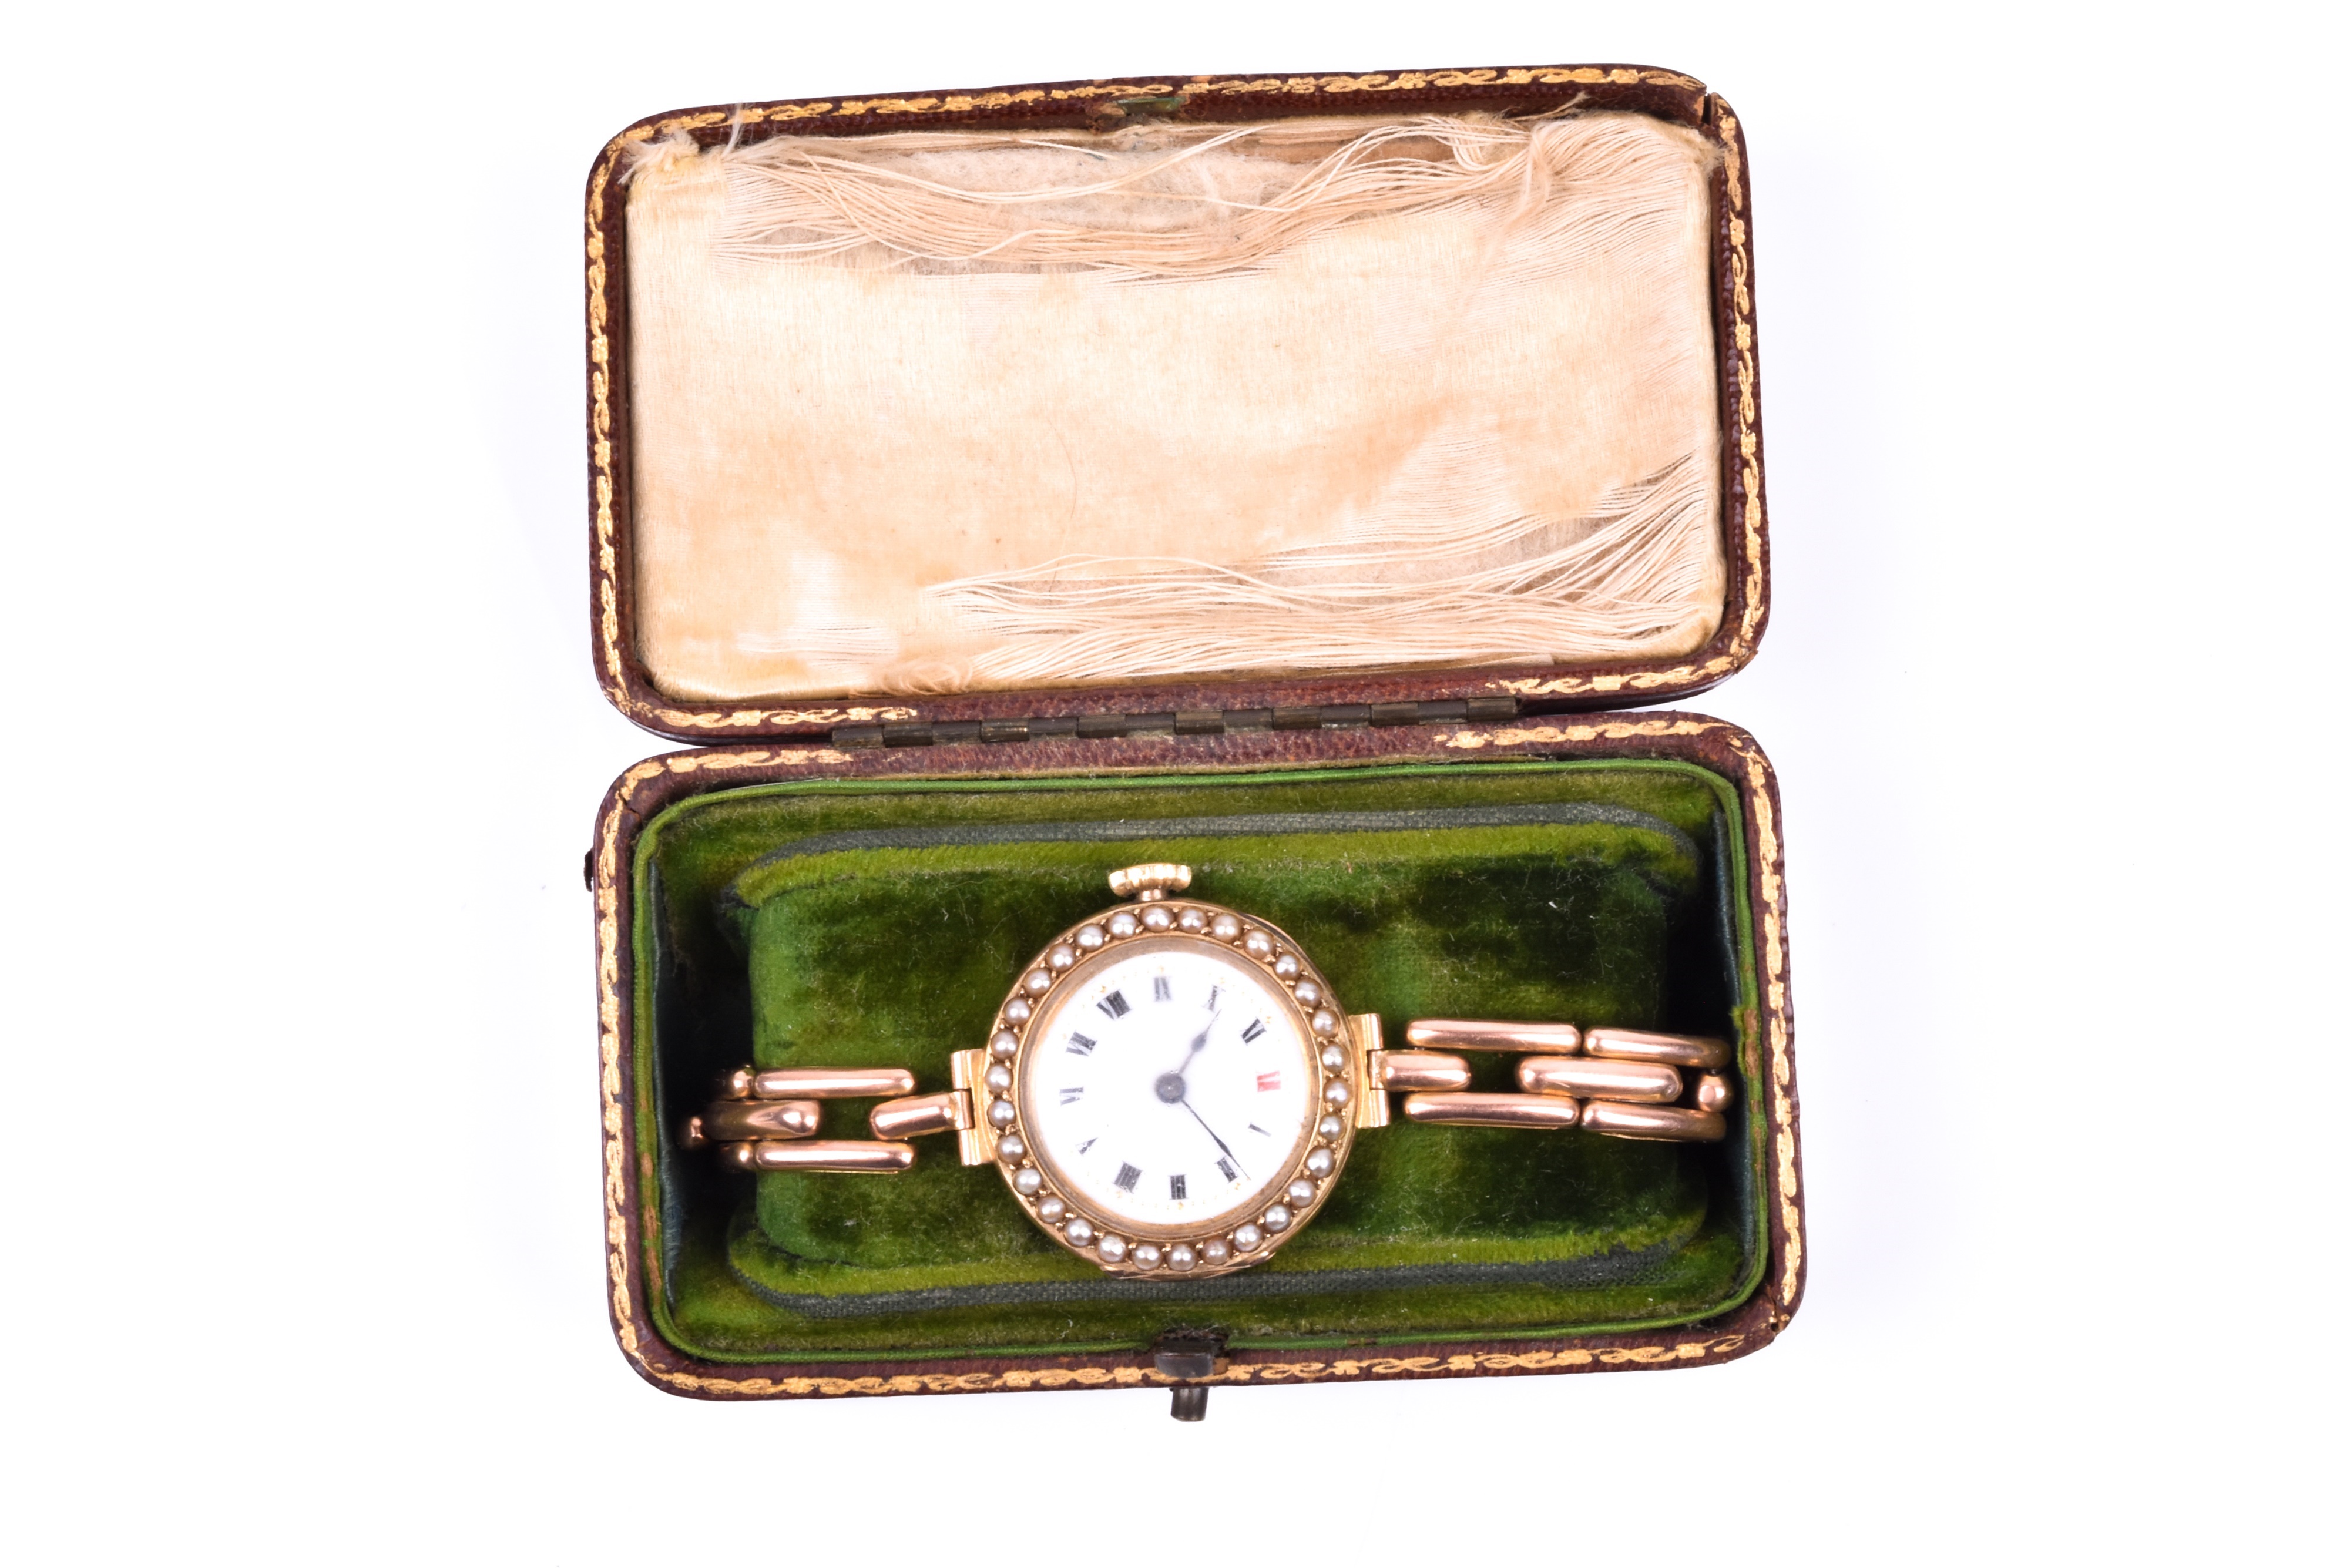 Lot 805: An early 20th century yellow metal lady’s wristwatch which belonged to a sister who taught in Uganda until she was expelled by Idi Amin!